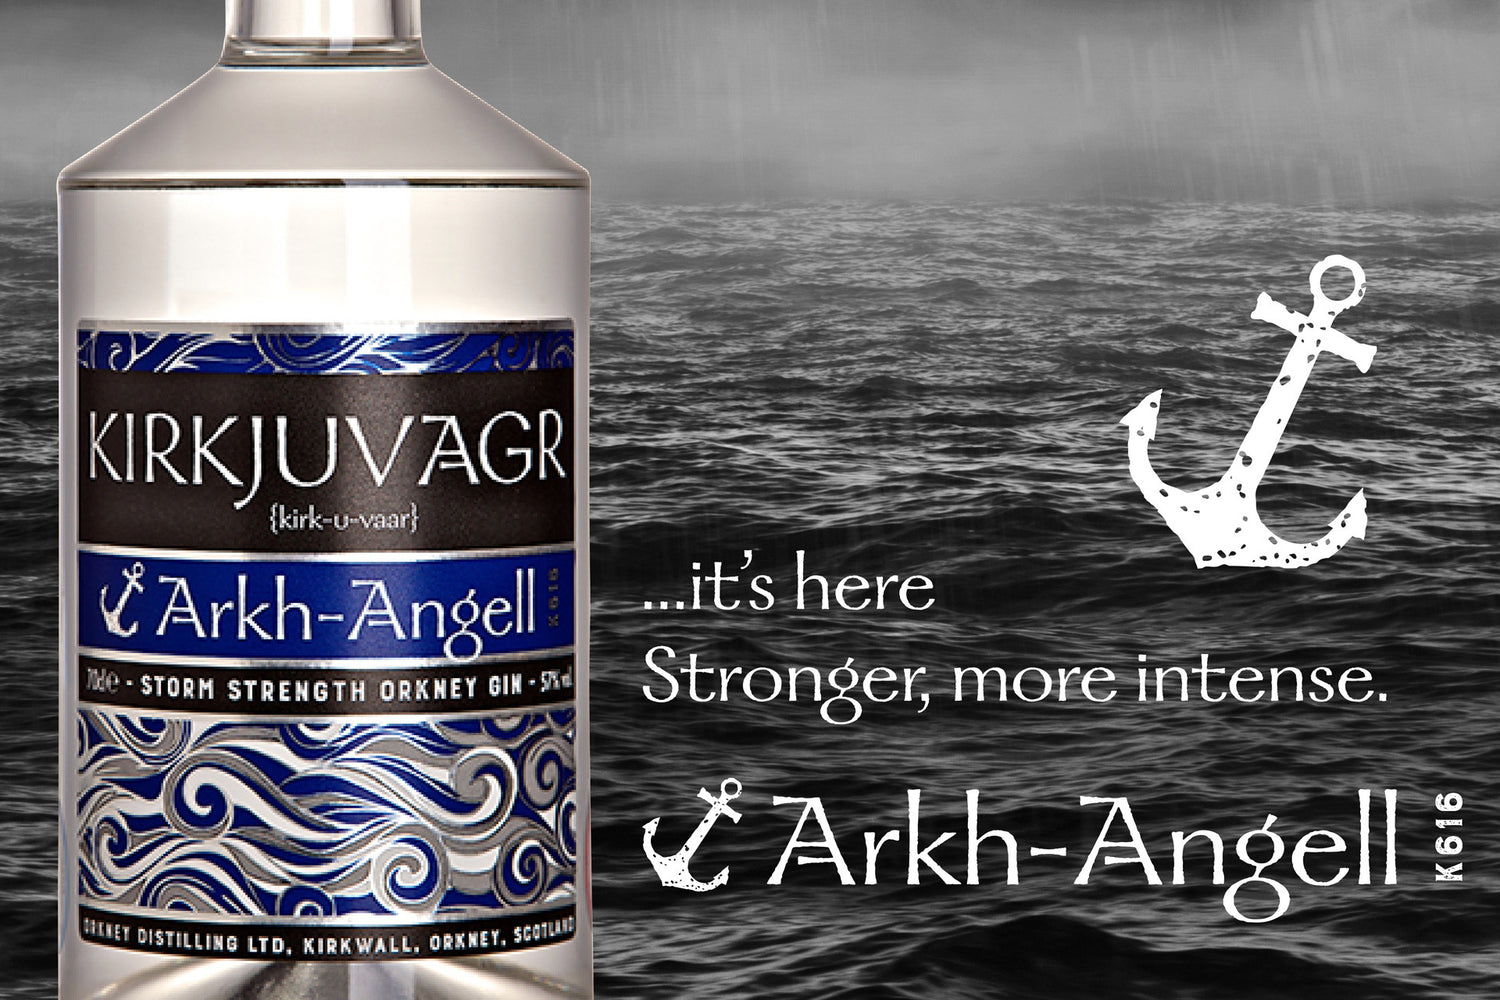 Arkh-Angell Storm Strength Orkney Gin is here!